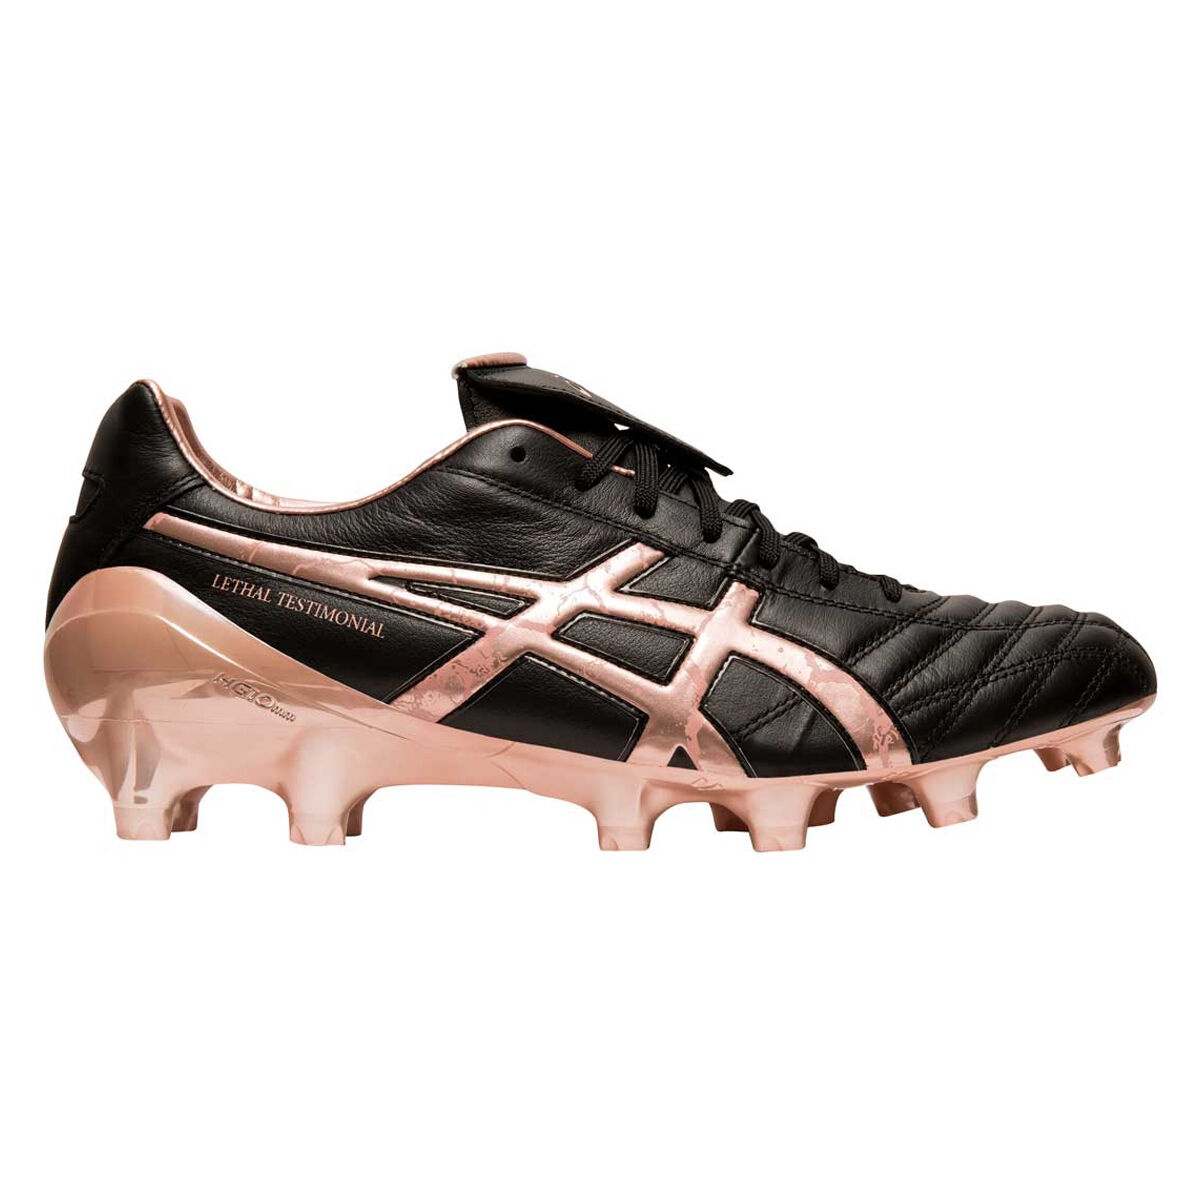 asics womens boots, OFF 76%,welcome to buy!